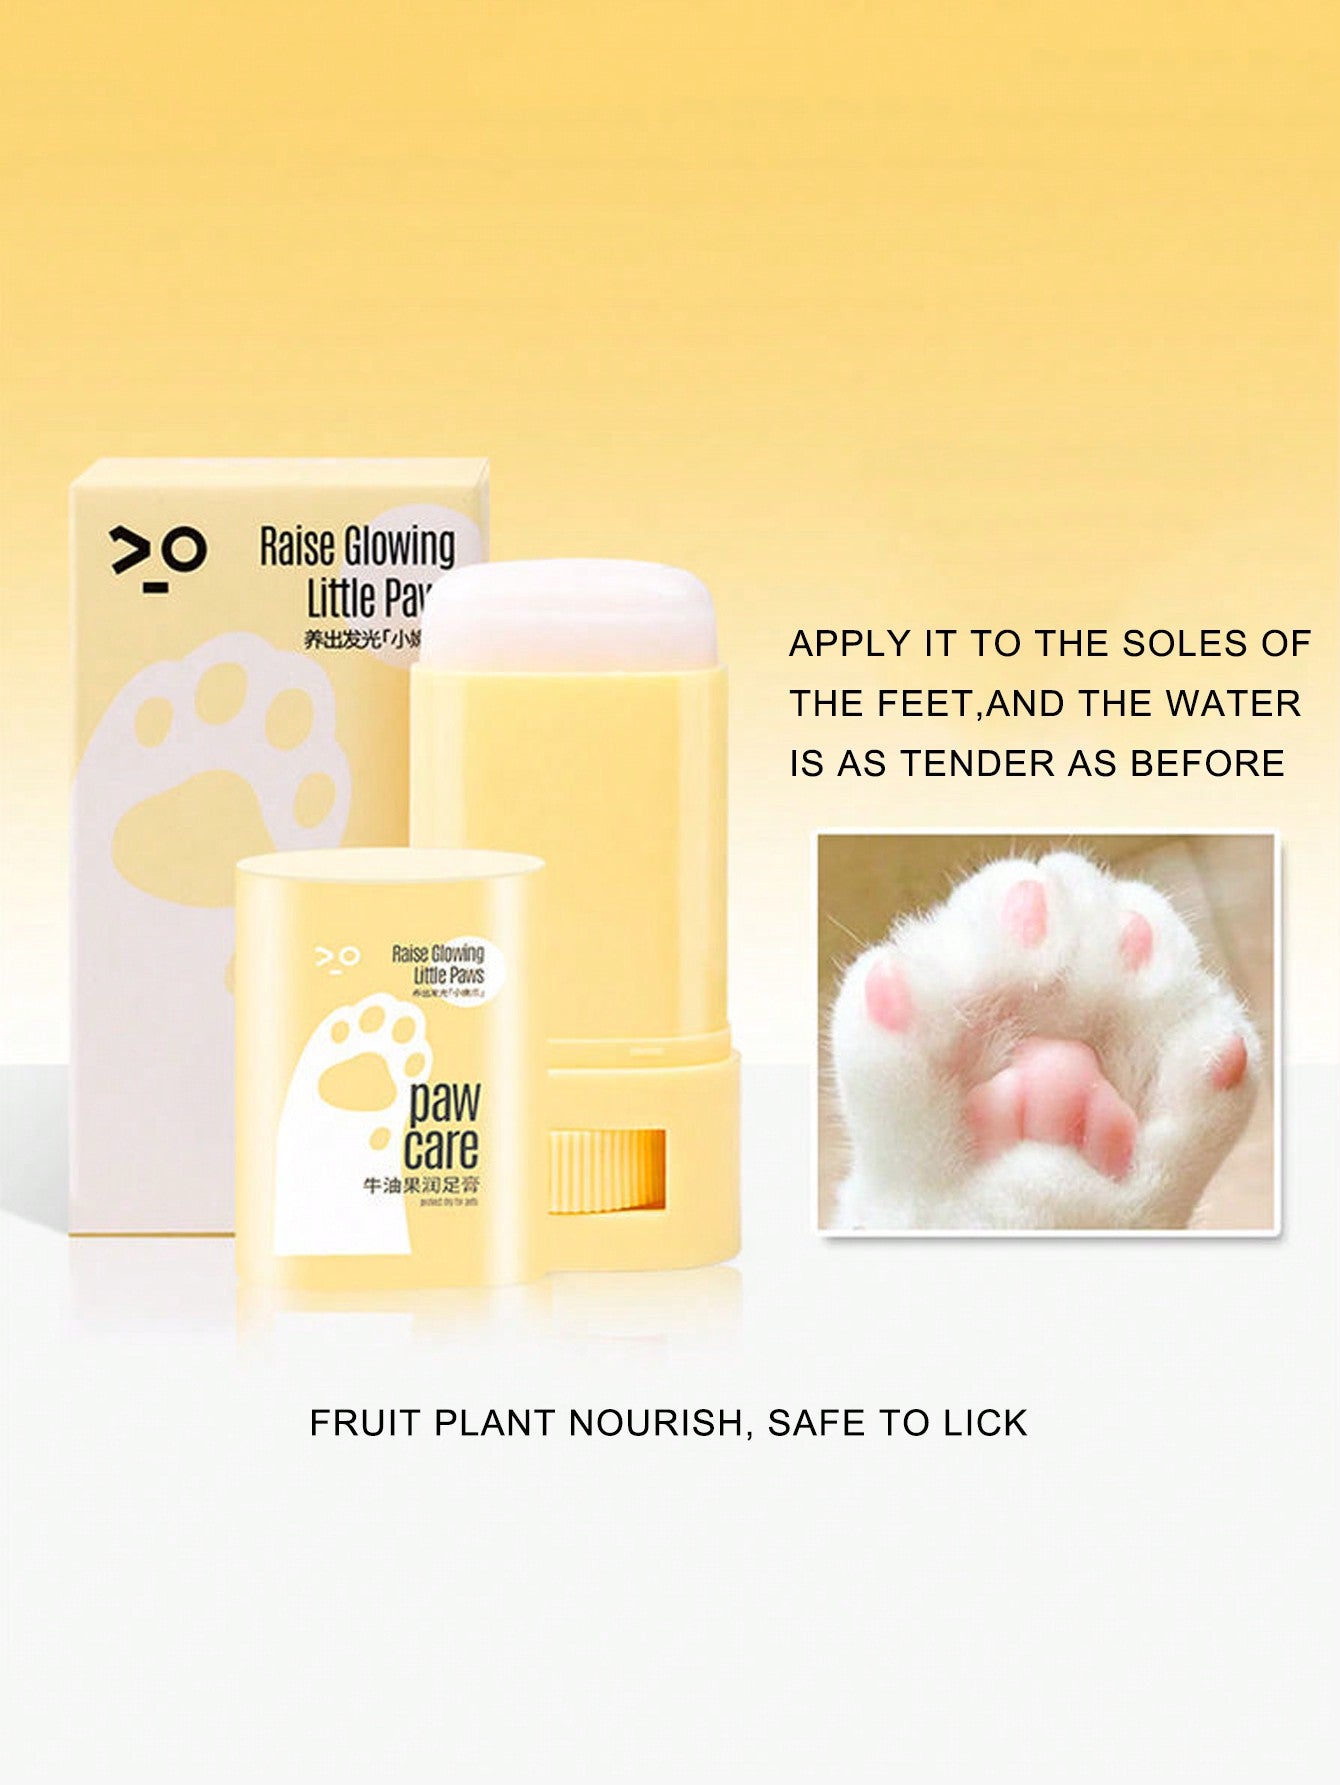 1pc Pet Paw Cream For Cats And Dogs, Footpad Care And Cleaning Moisturizer For Dogs With Dry Or Cracked Paws